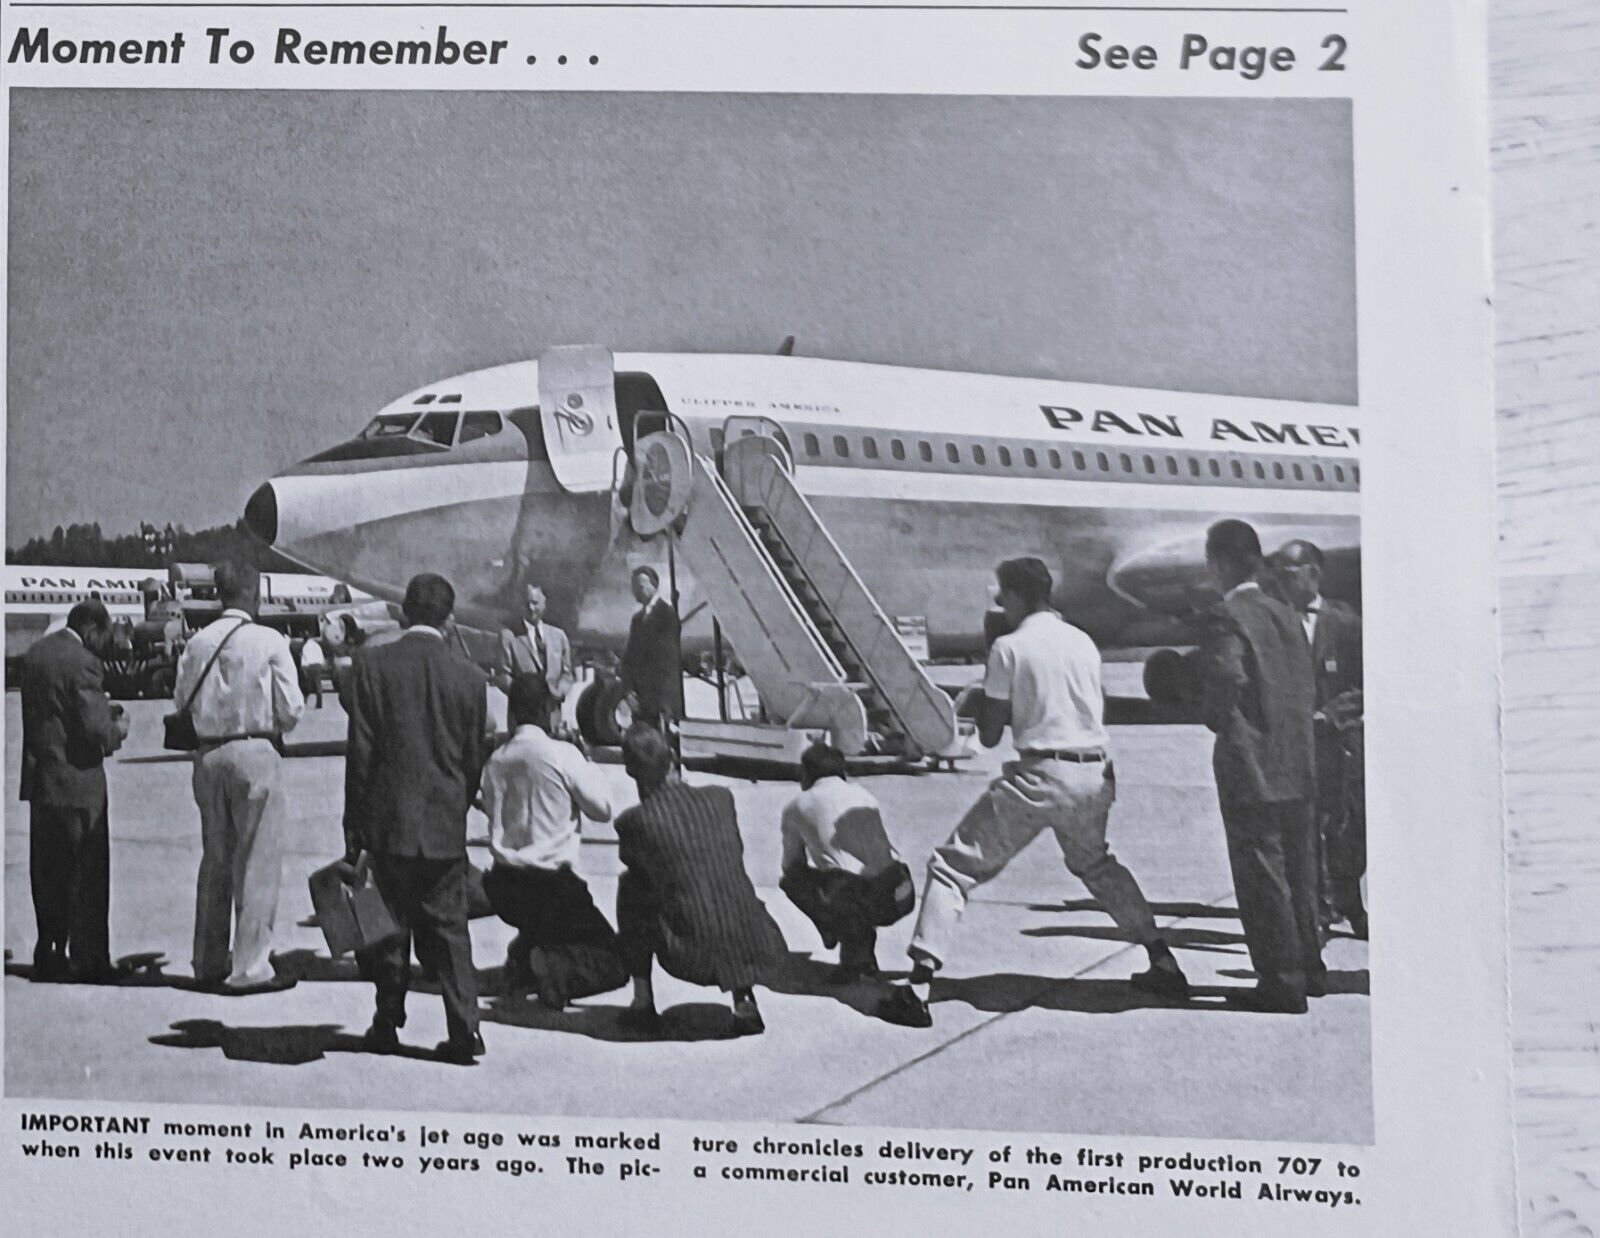 Boeing News Aug. 18, 1960 1st Pan Am 1st Boeing 707 photo & 707 Changes